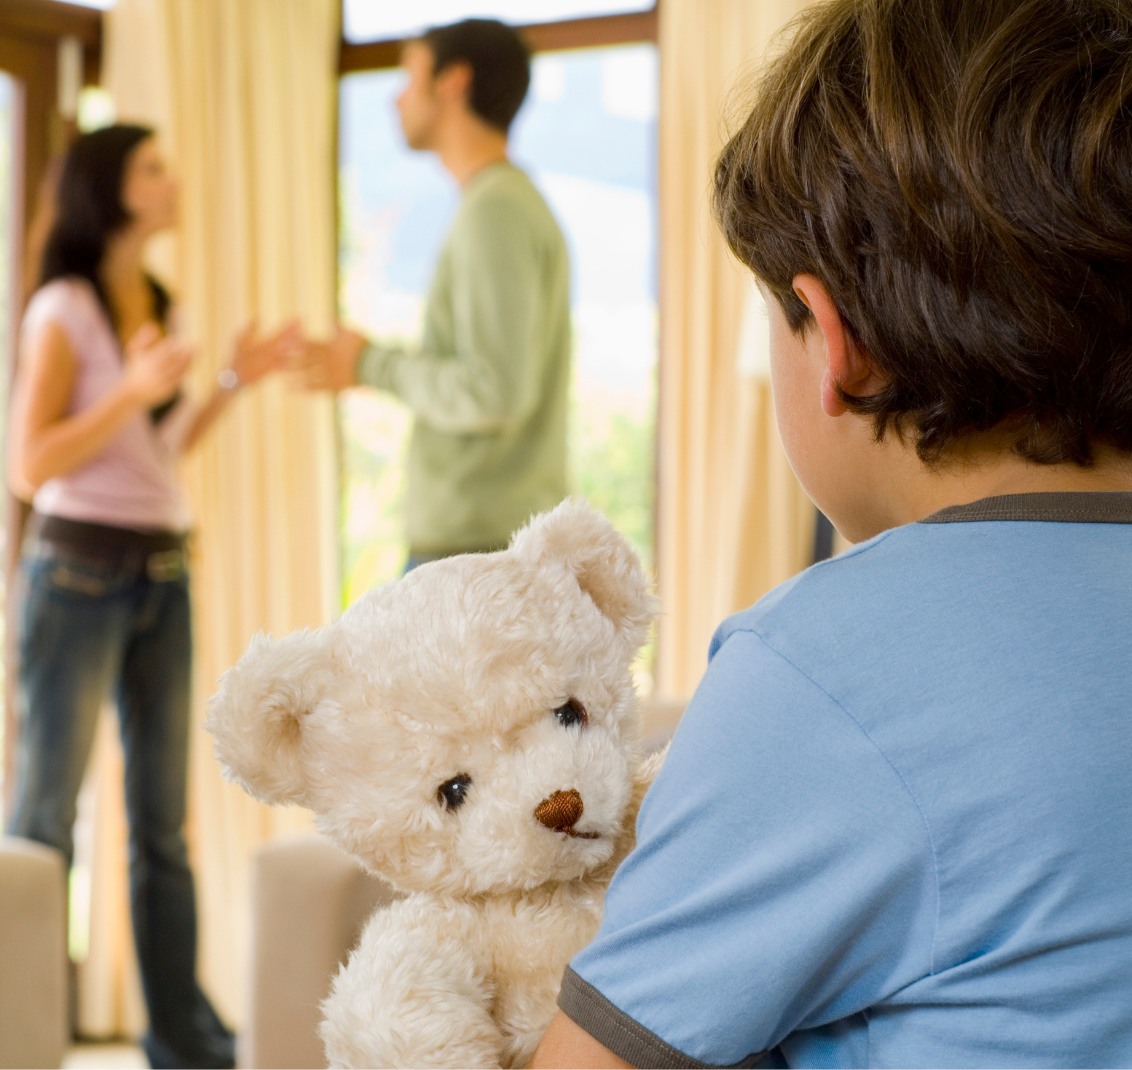 a boy in a blue shirt holding a bear watching his parents fight over family law and child custody during their divorce